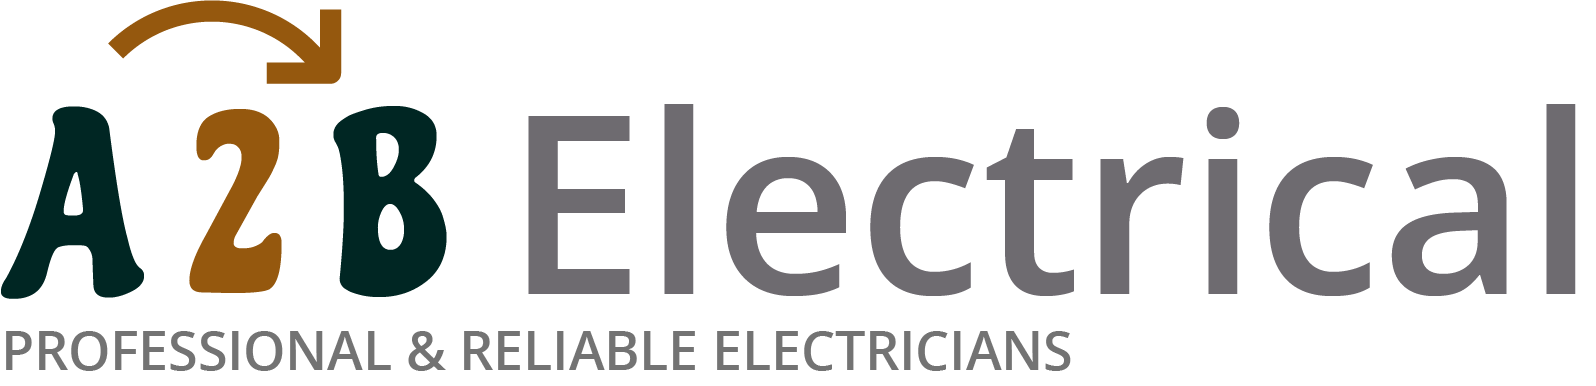 If you have electrical wiring problems in Shildon, we can provide an electrician to have a look for you. 